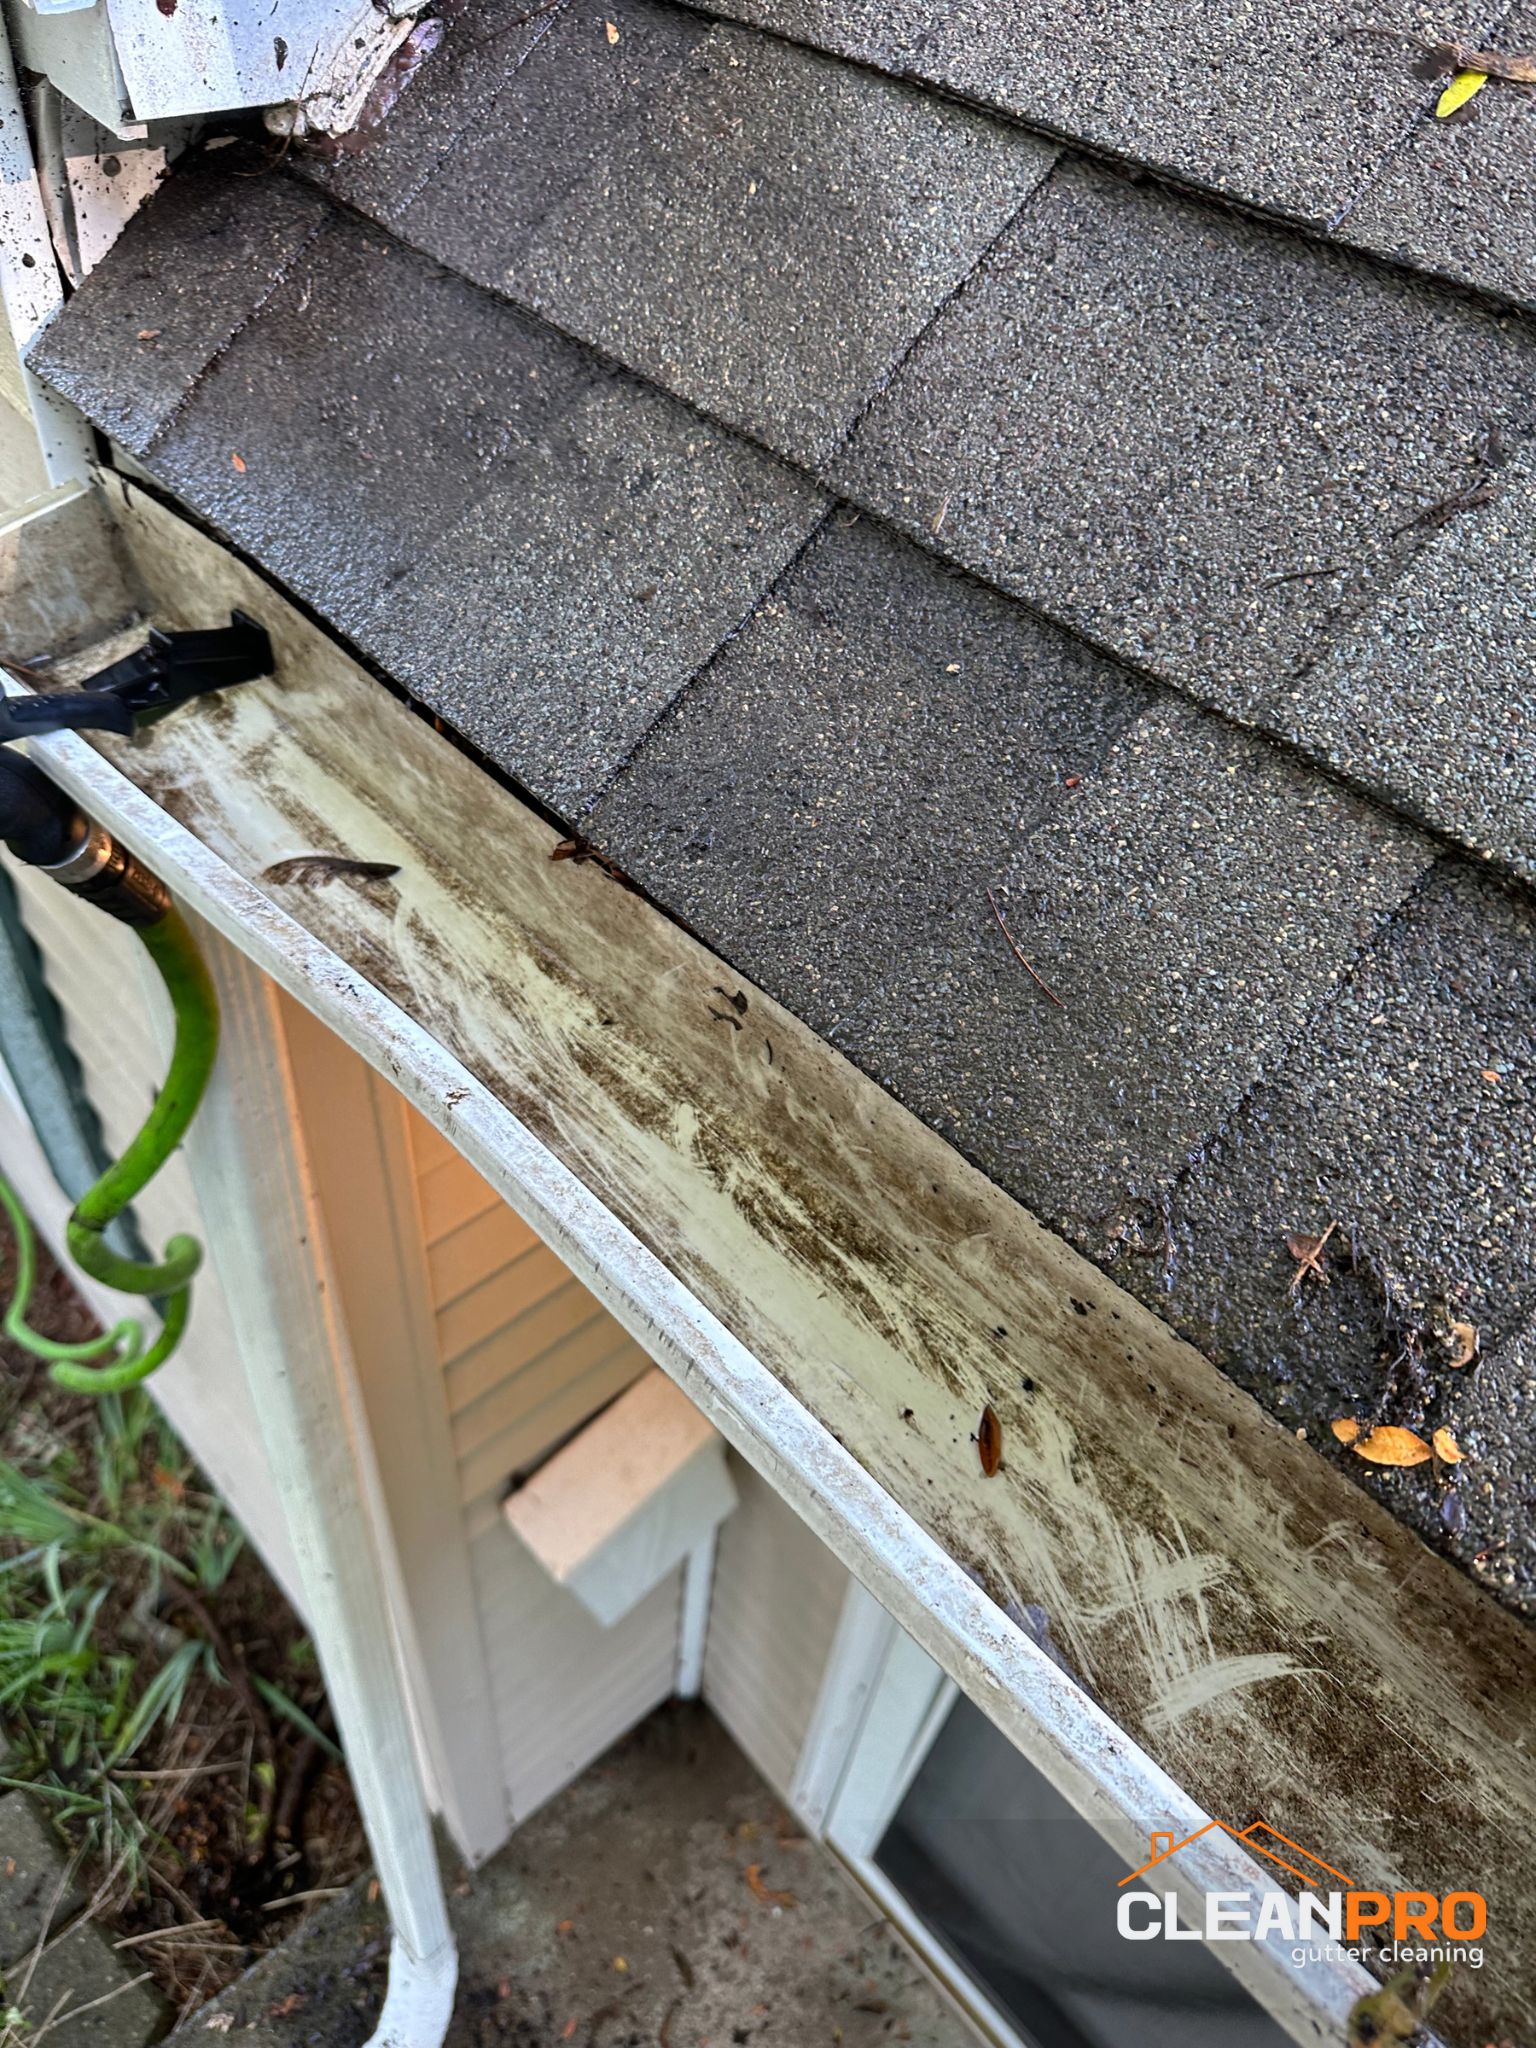 Top Notch Gutter Cleaning Service in Greensboro